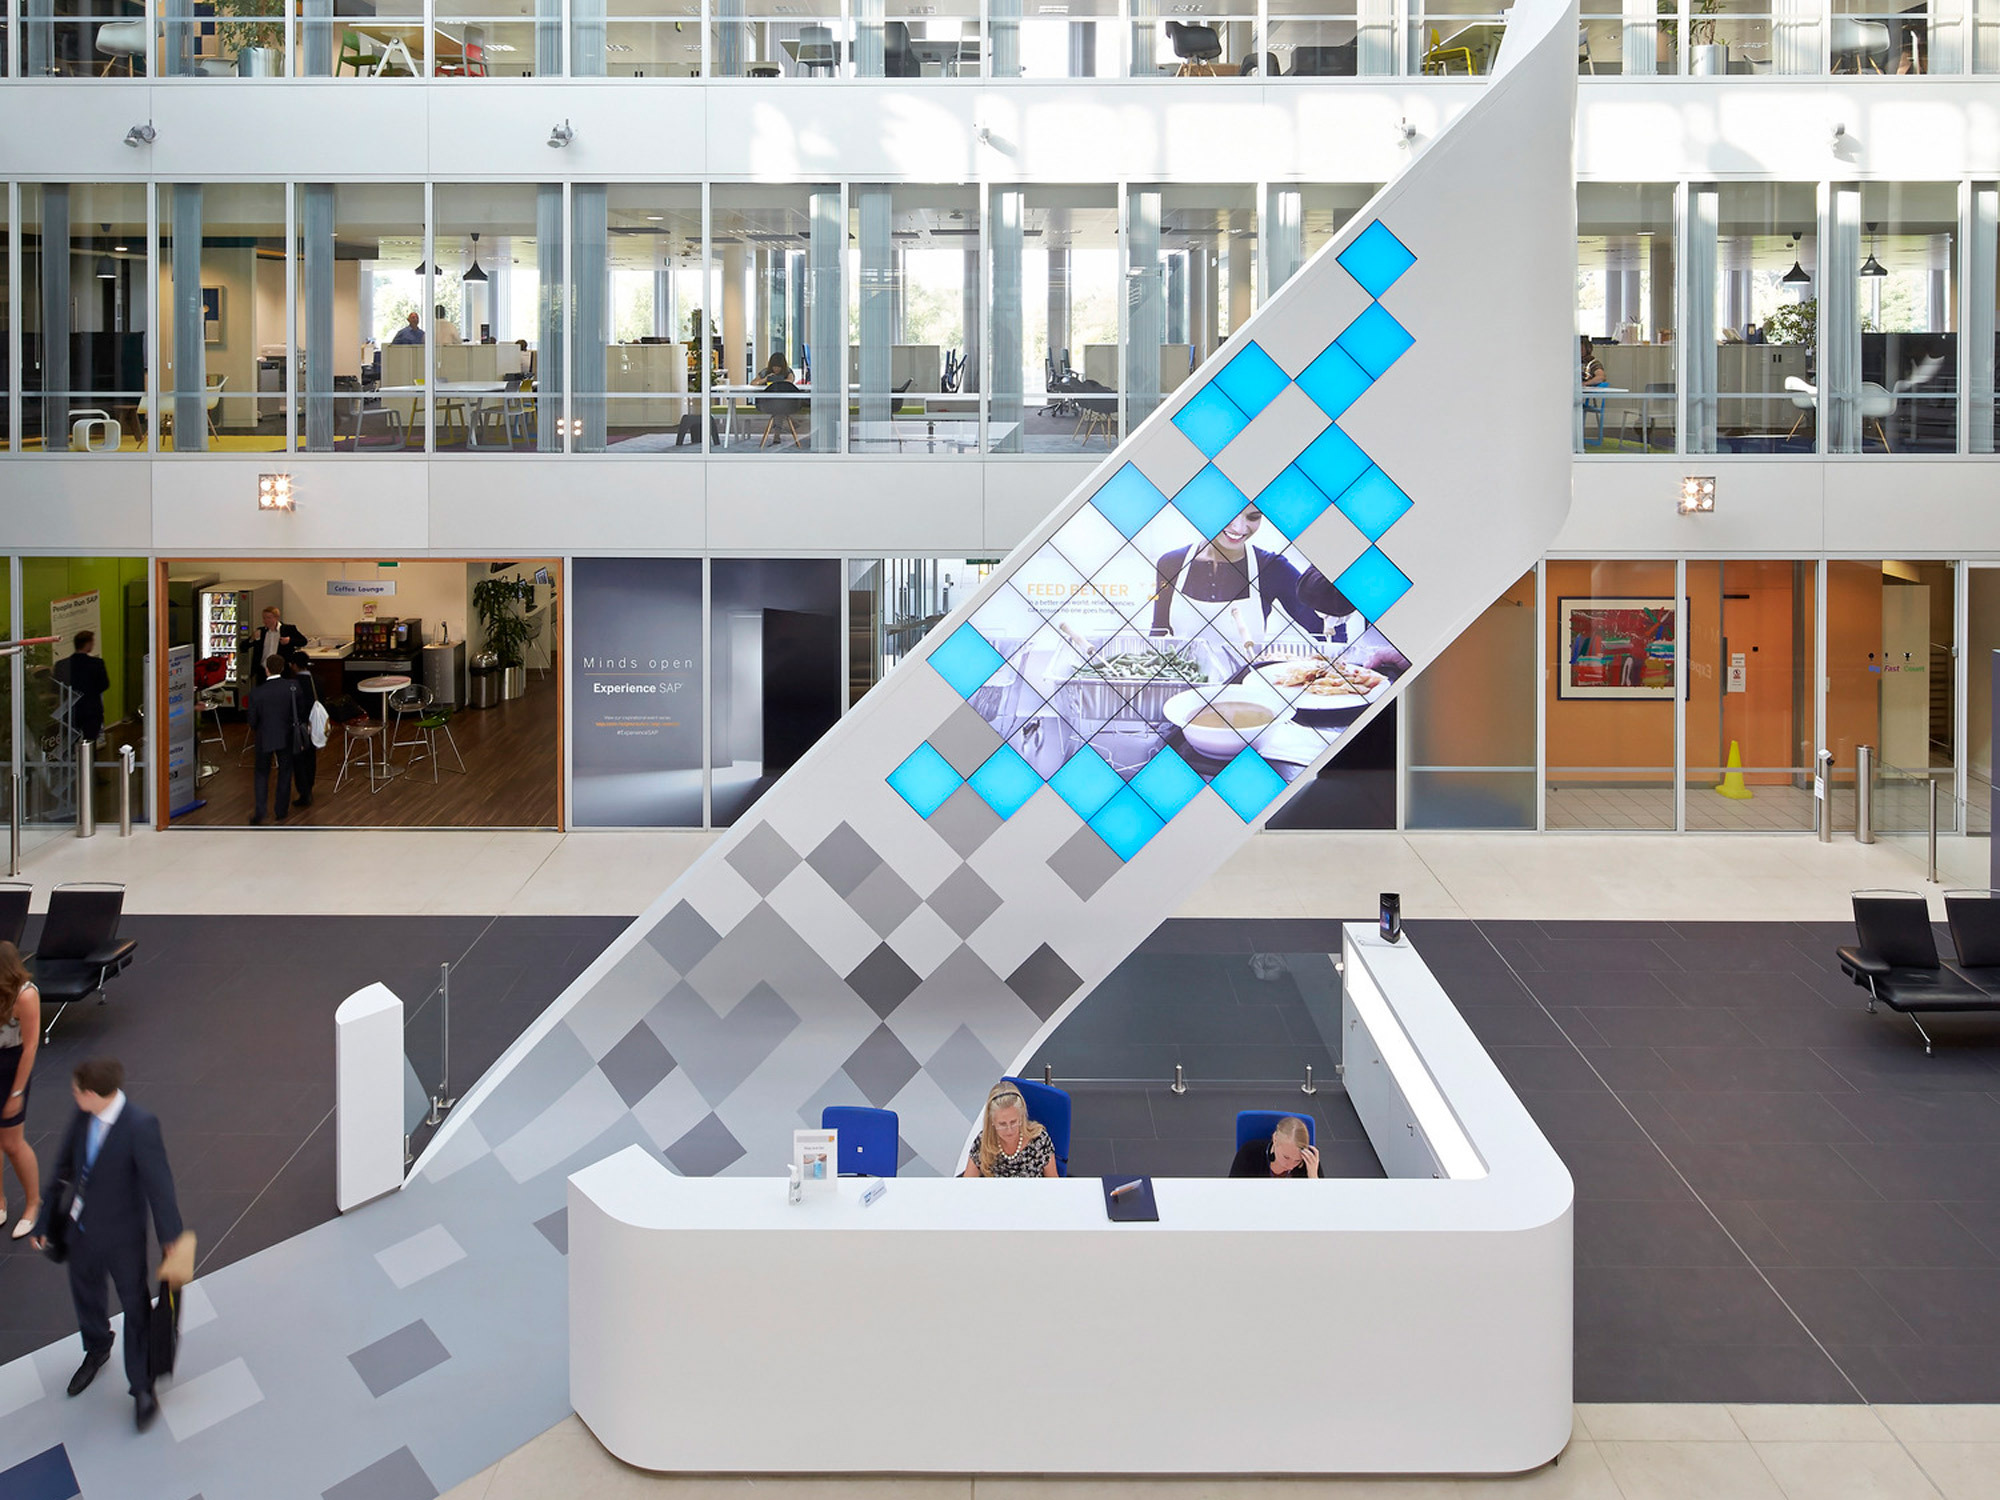 Modern office lobby featuring a sculptural white staircase with blue-tinted glass balustrades. The reception area below mirrors the angular design, complemented by a patterned gray floor that extends throughout the bright atrium surrounded by multi-level glass-fronted offices.